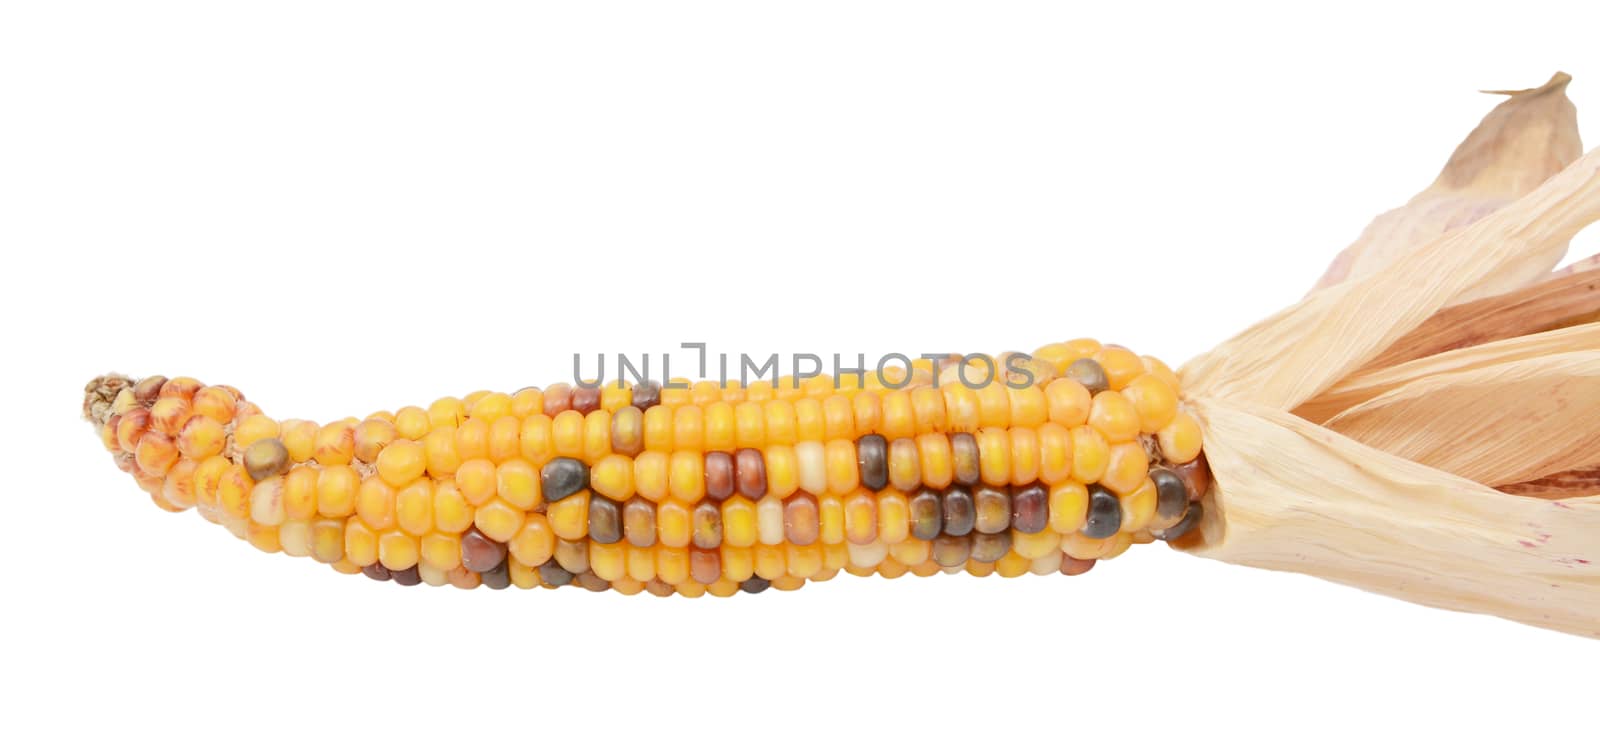 Decorative sweetcorn with yellow, red and black niblets by sarahdoow